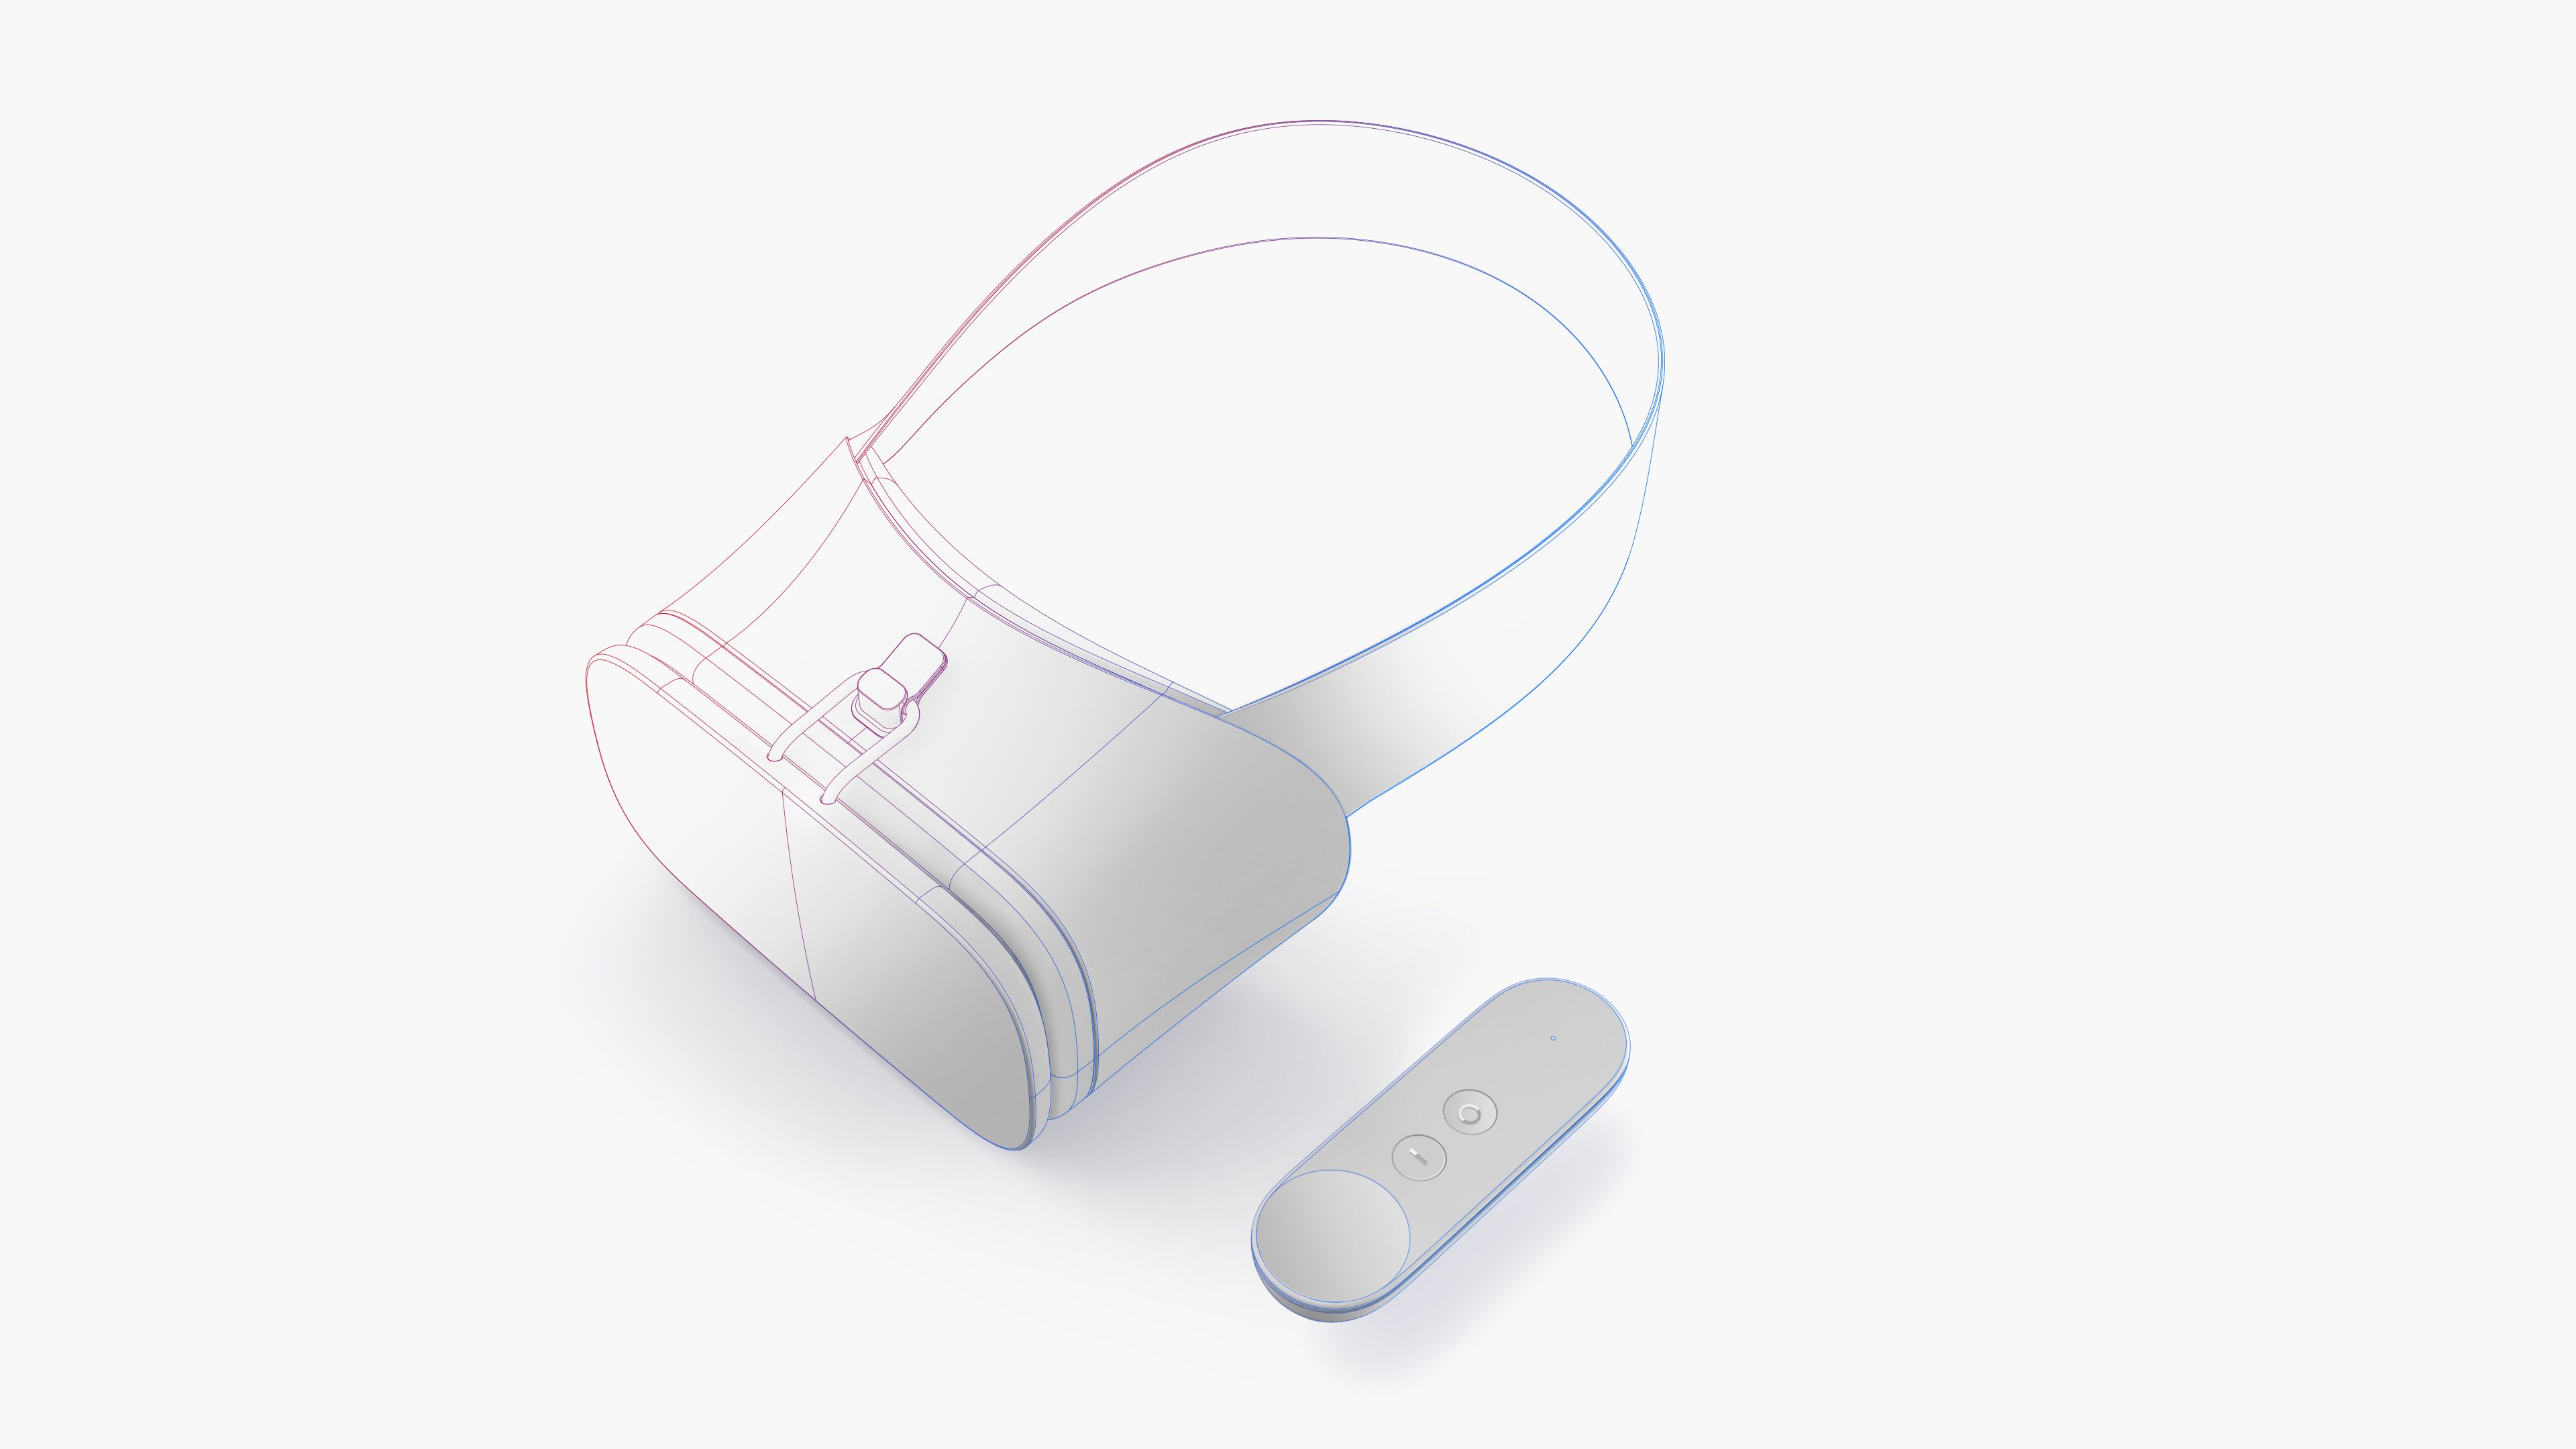 Google's plans for VR are even more ambitious than we thought